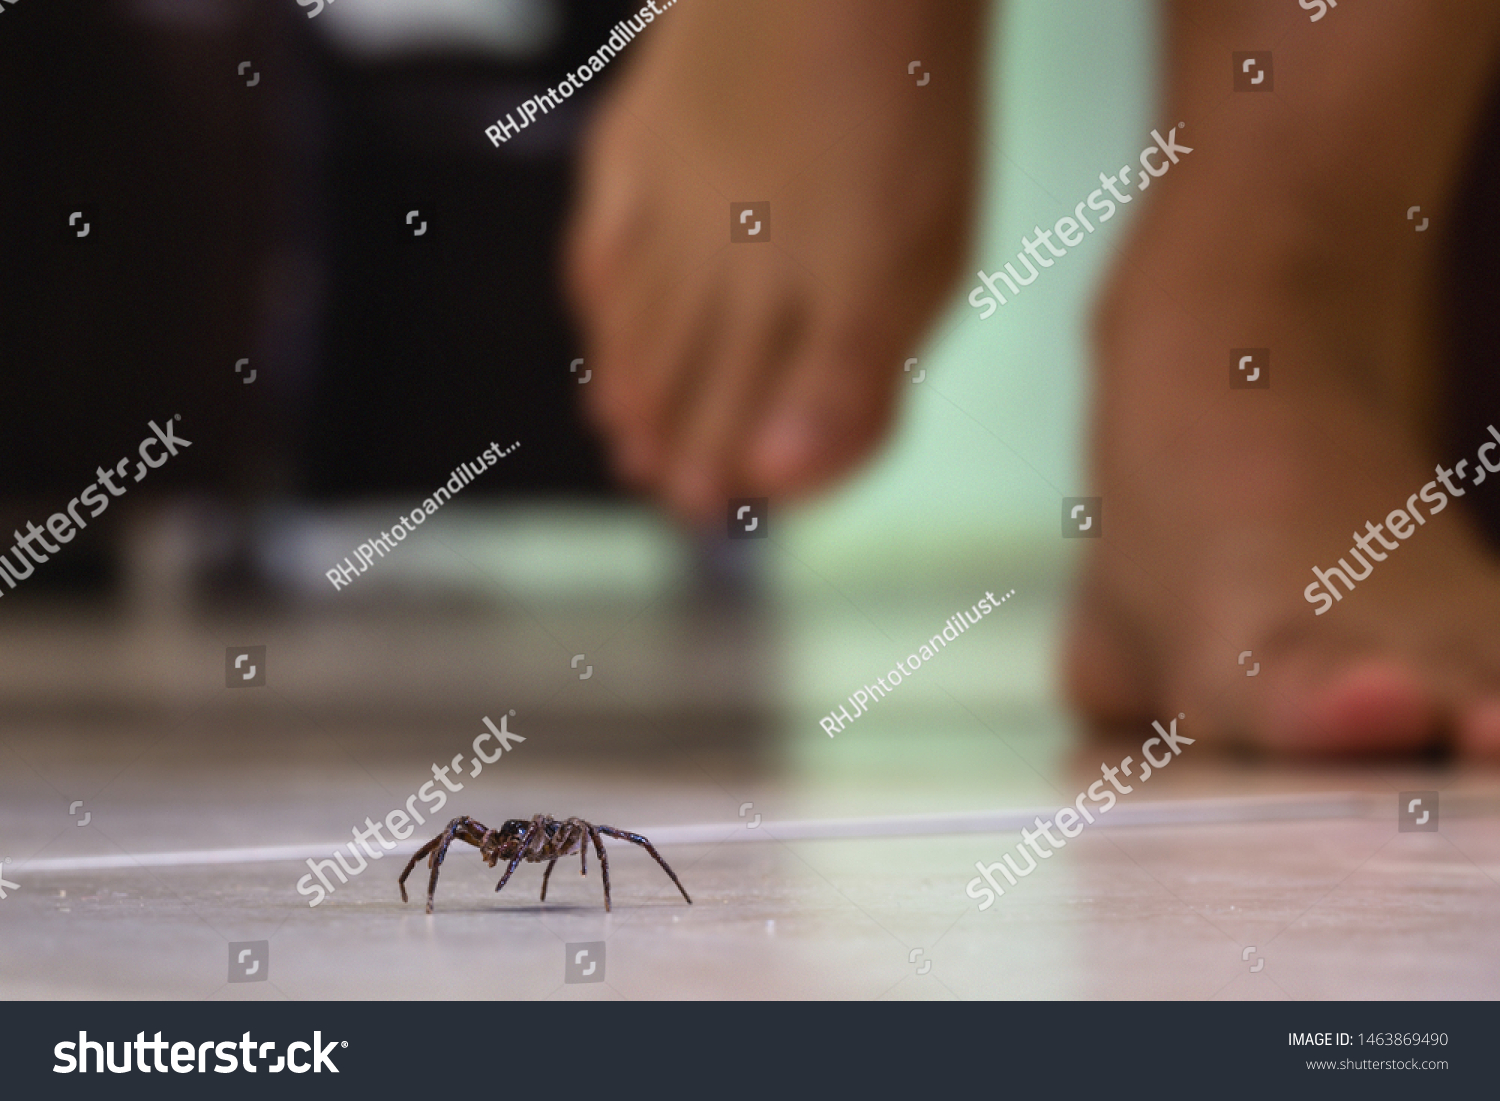 common house spider on a smooth tile floor seen from ground level in a floor in a residential home #1463869490